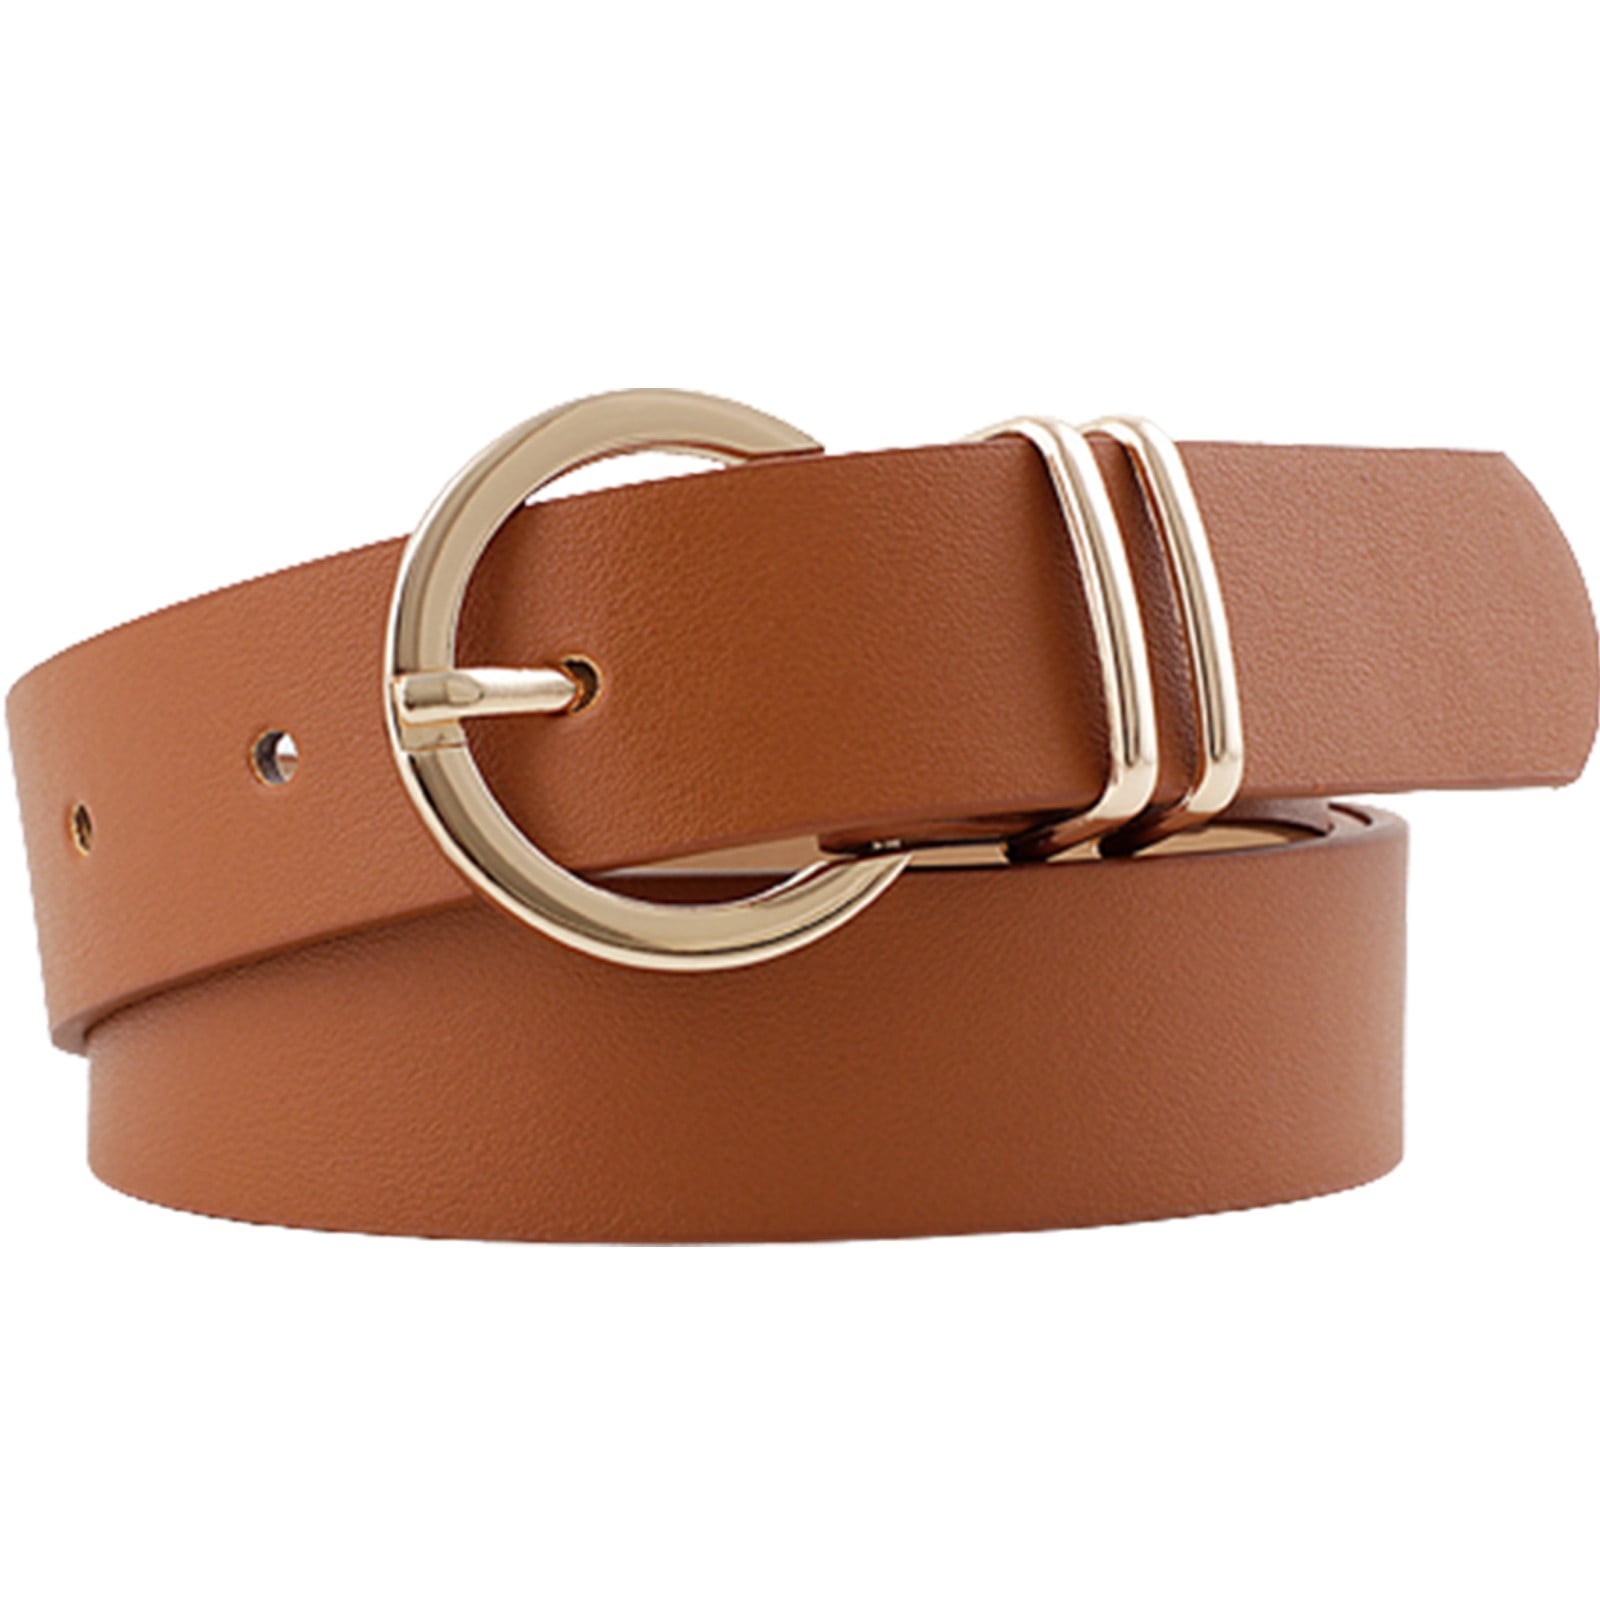 CBGELRT Women's Leather Belts for Jeans Dress with Gold Pin Buckle Plus  Size Adjustable Wide Elastic Waist Belt Ladies Waistband, Coffee 